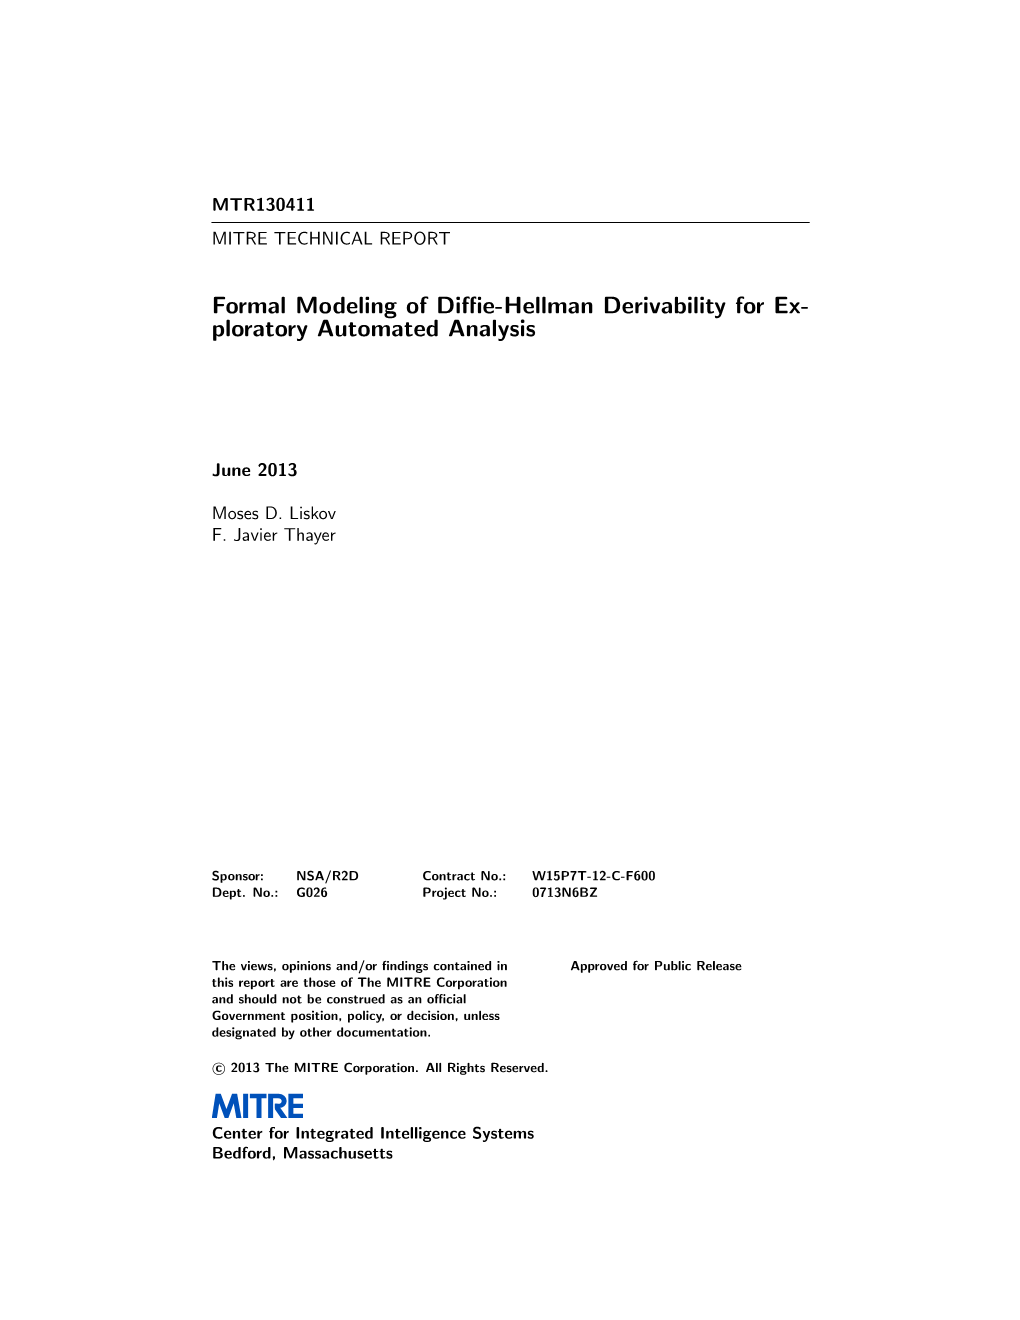 Formal Modeling of Diffie-Hellman Derivability for Ex